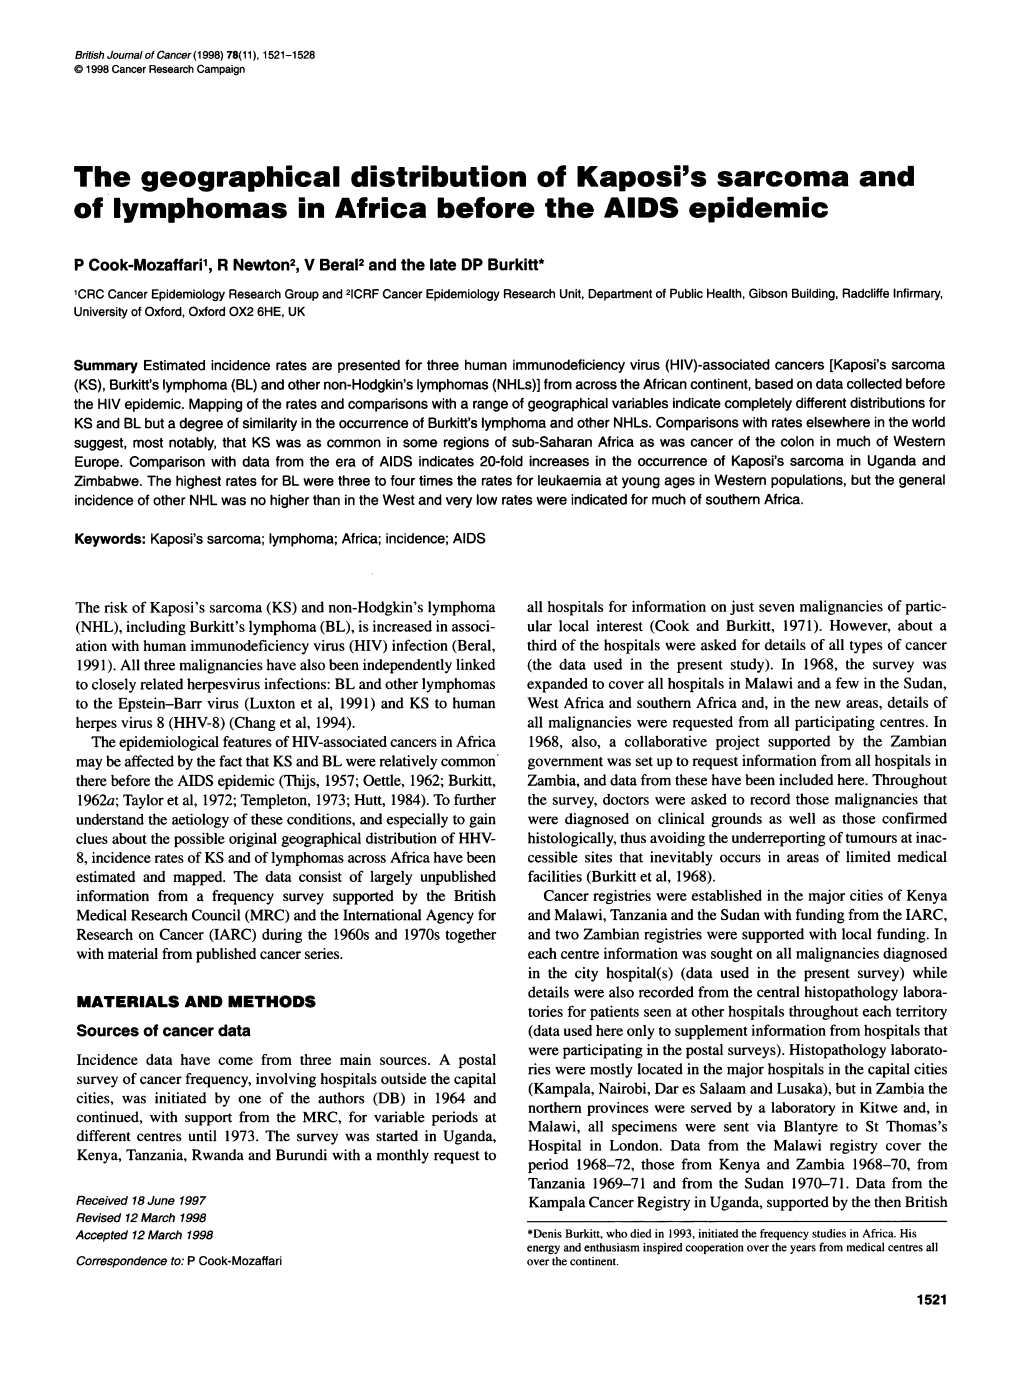 The Geographical Distribution of Kaposi's Sarcoma and of Lymphomas in Africa Before the AIDS Epidemic